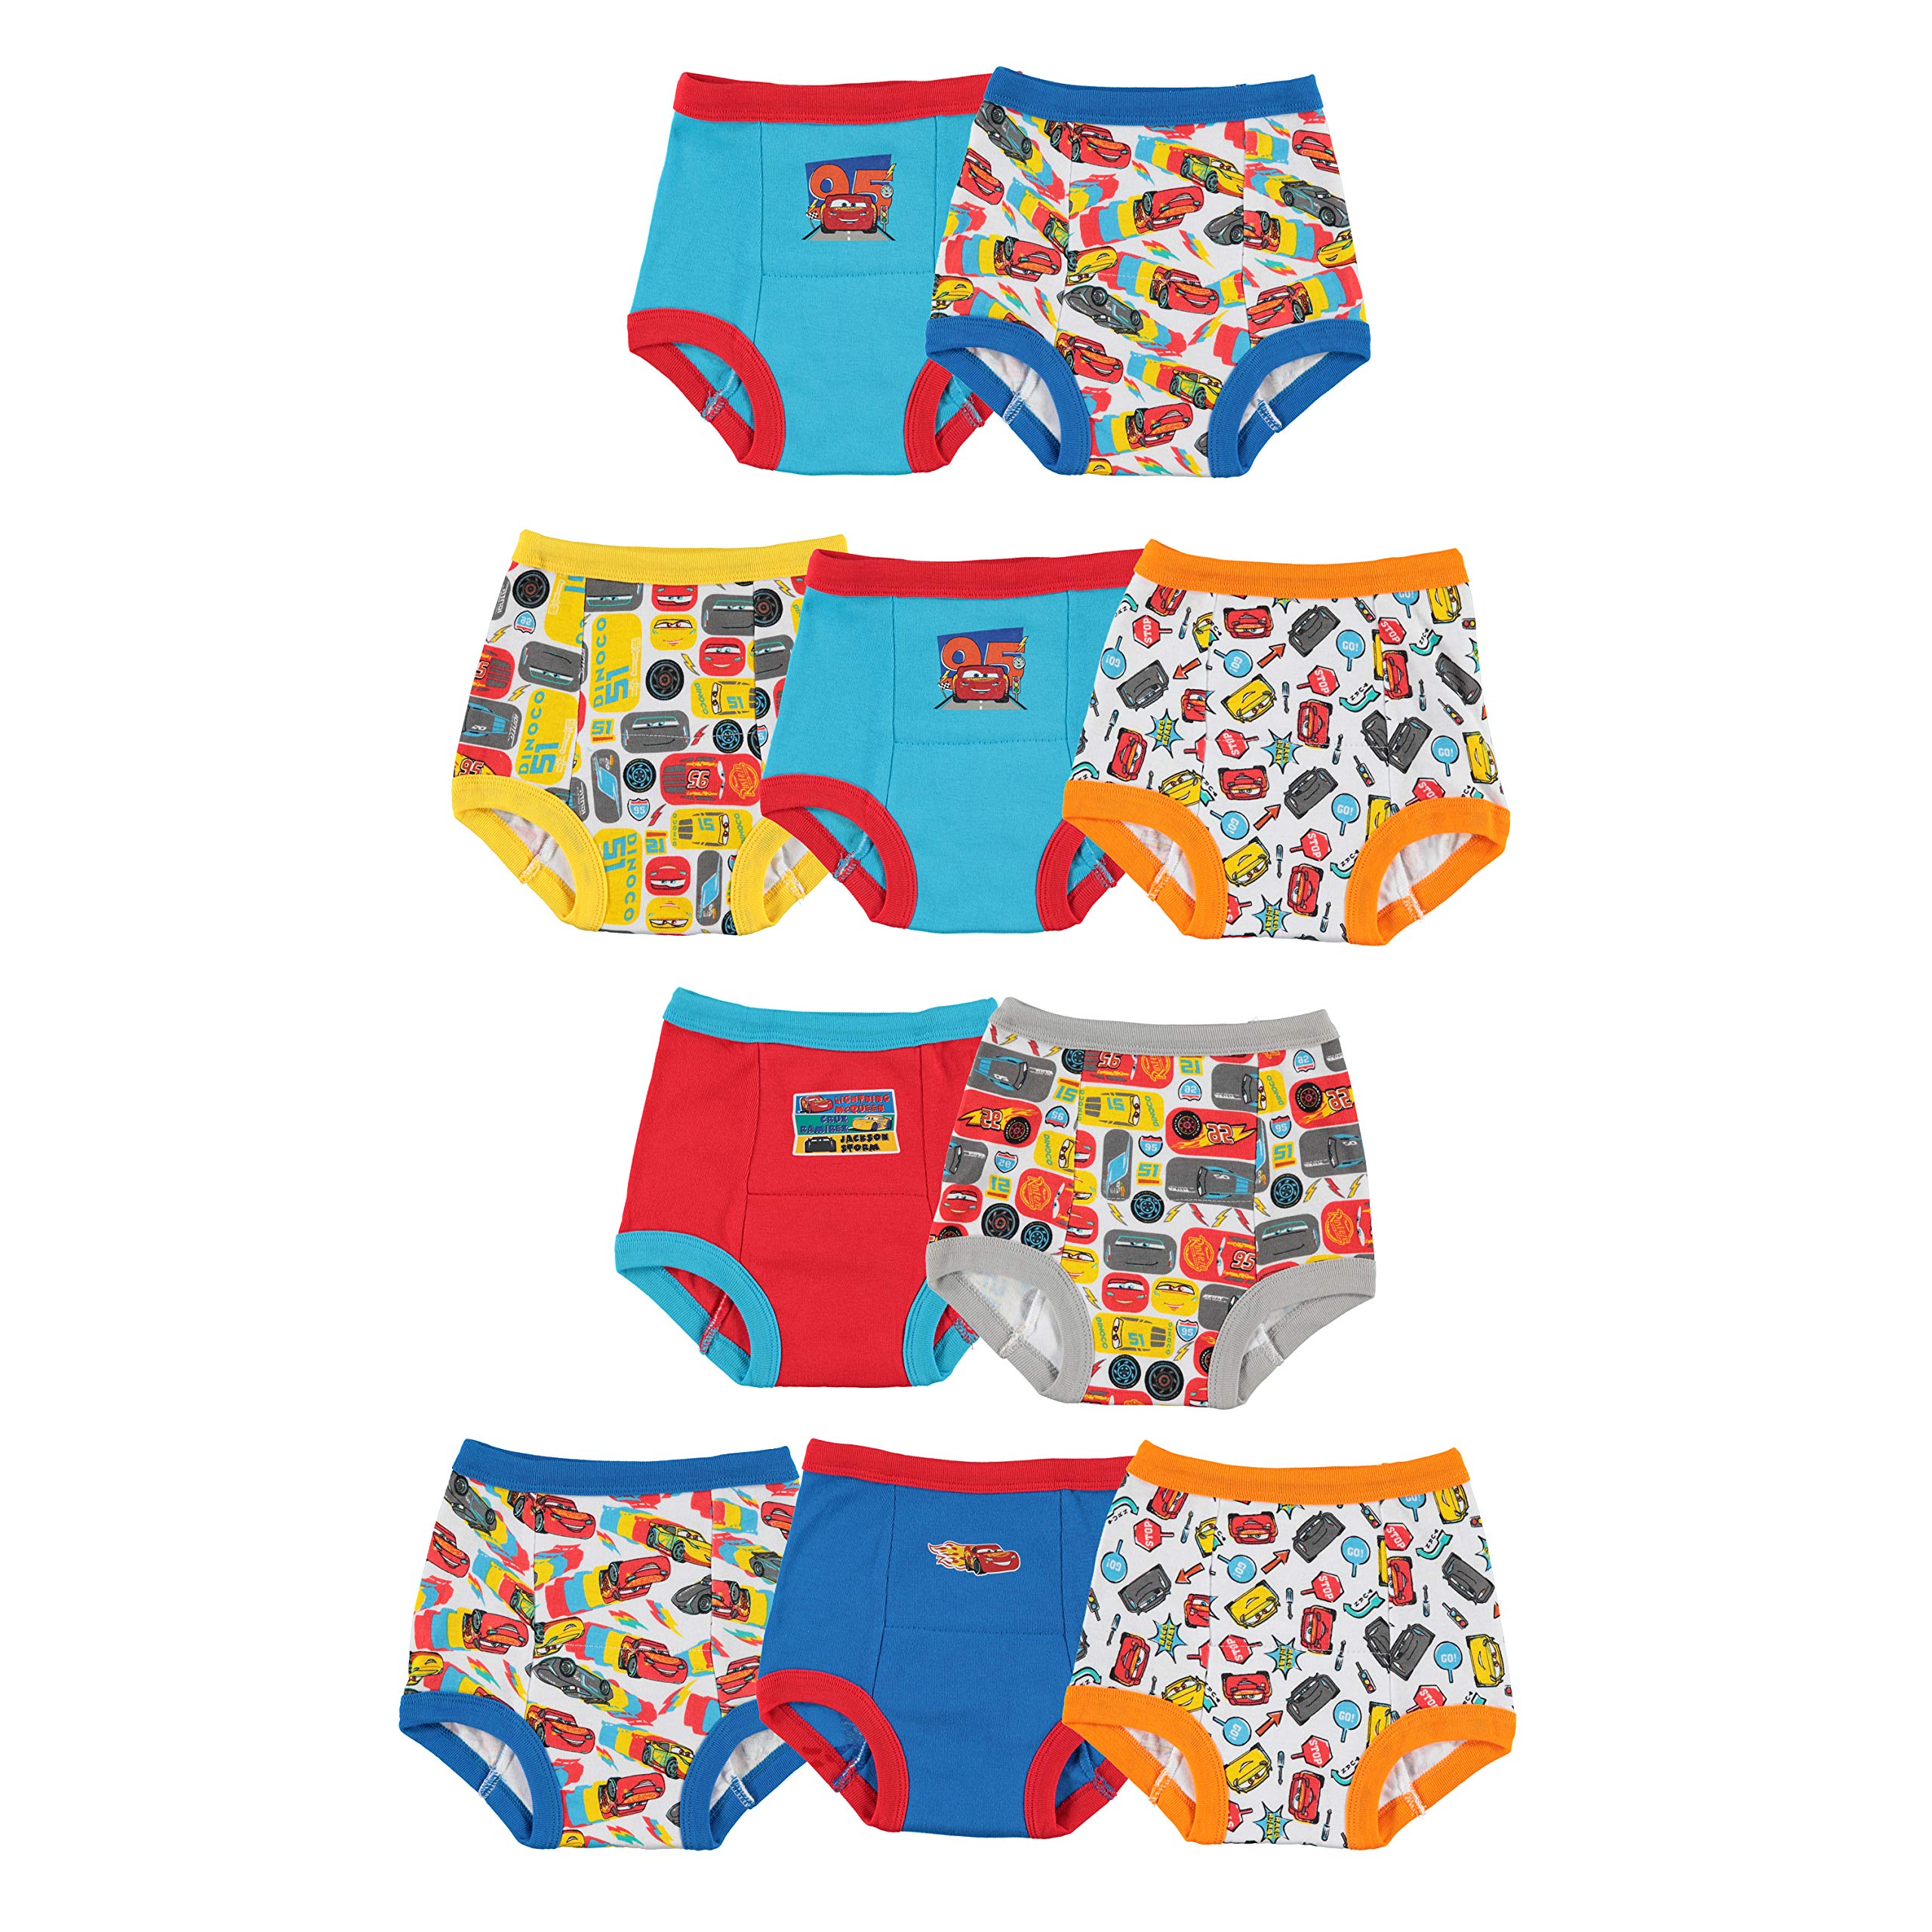 Buy DisneyBoys' Pixar 100% Combed Cotton Briefs with Cars, Toy